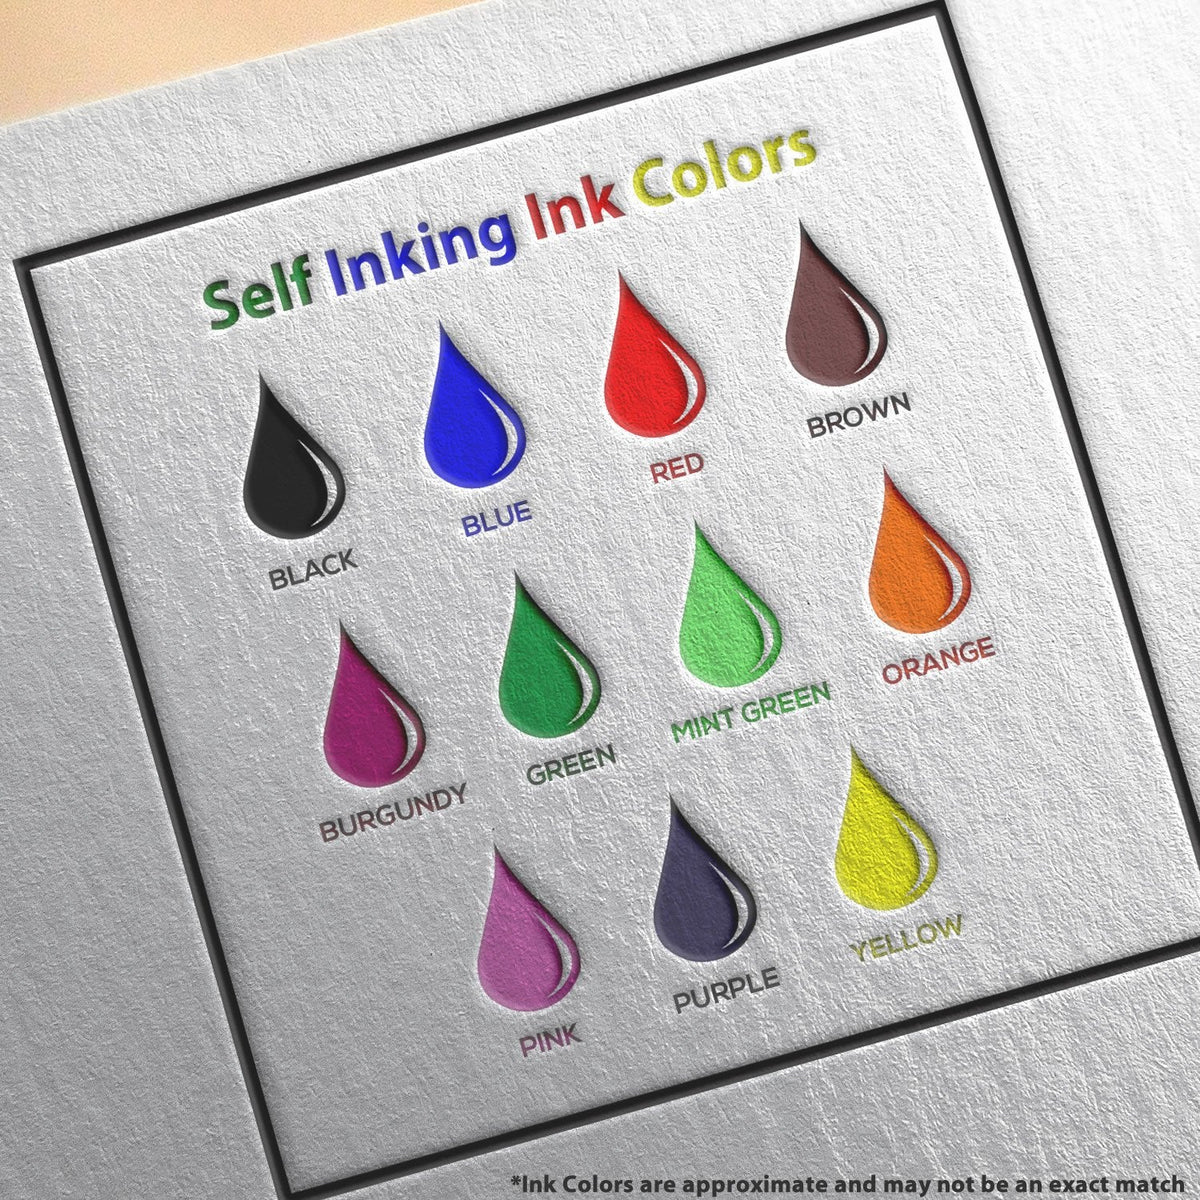 Self-Inking Received with Box Stamp Ink Color Options